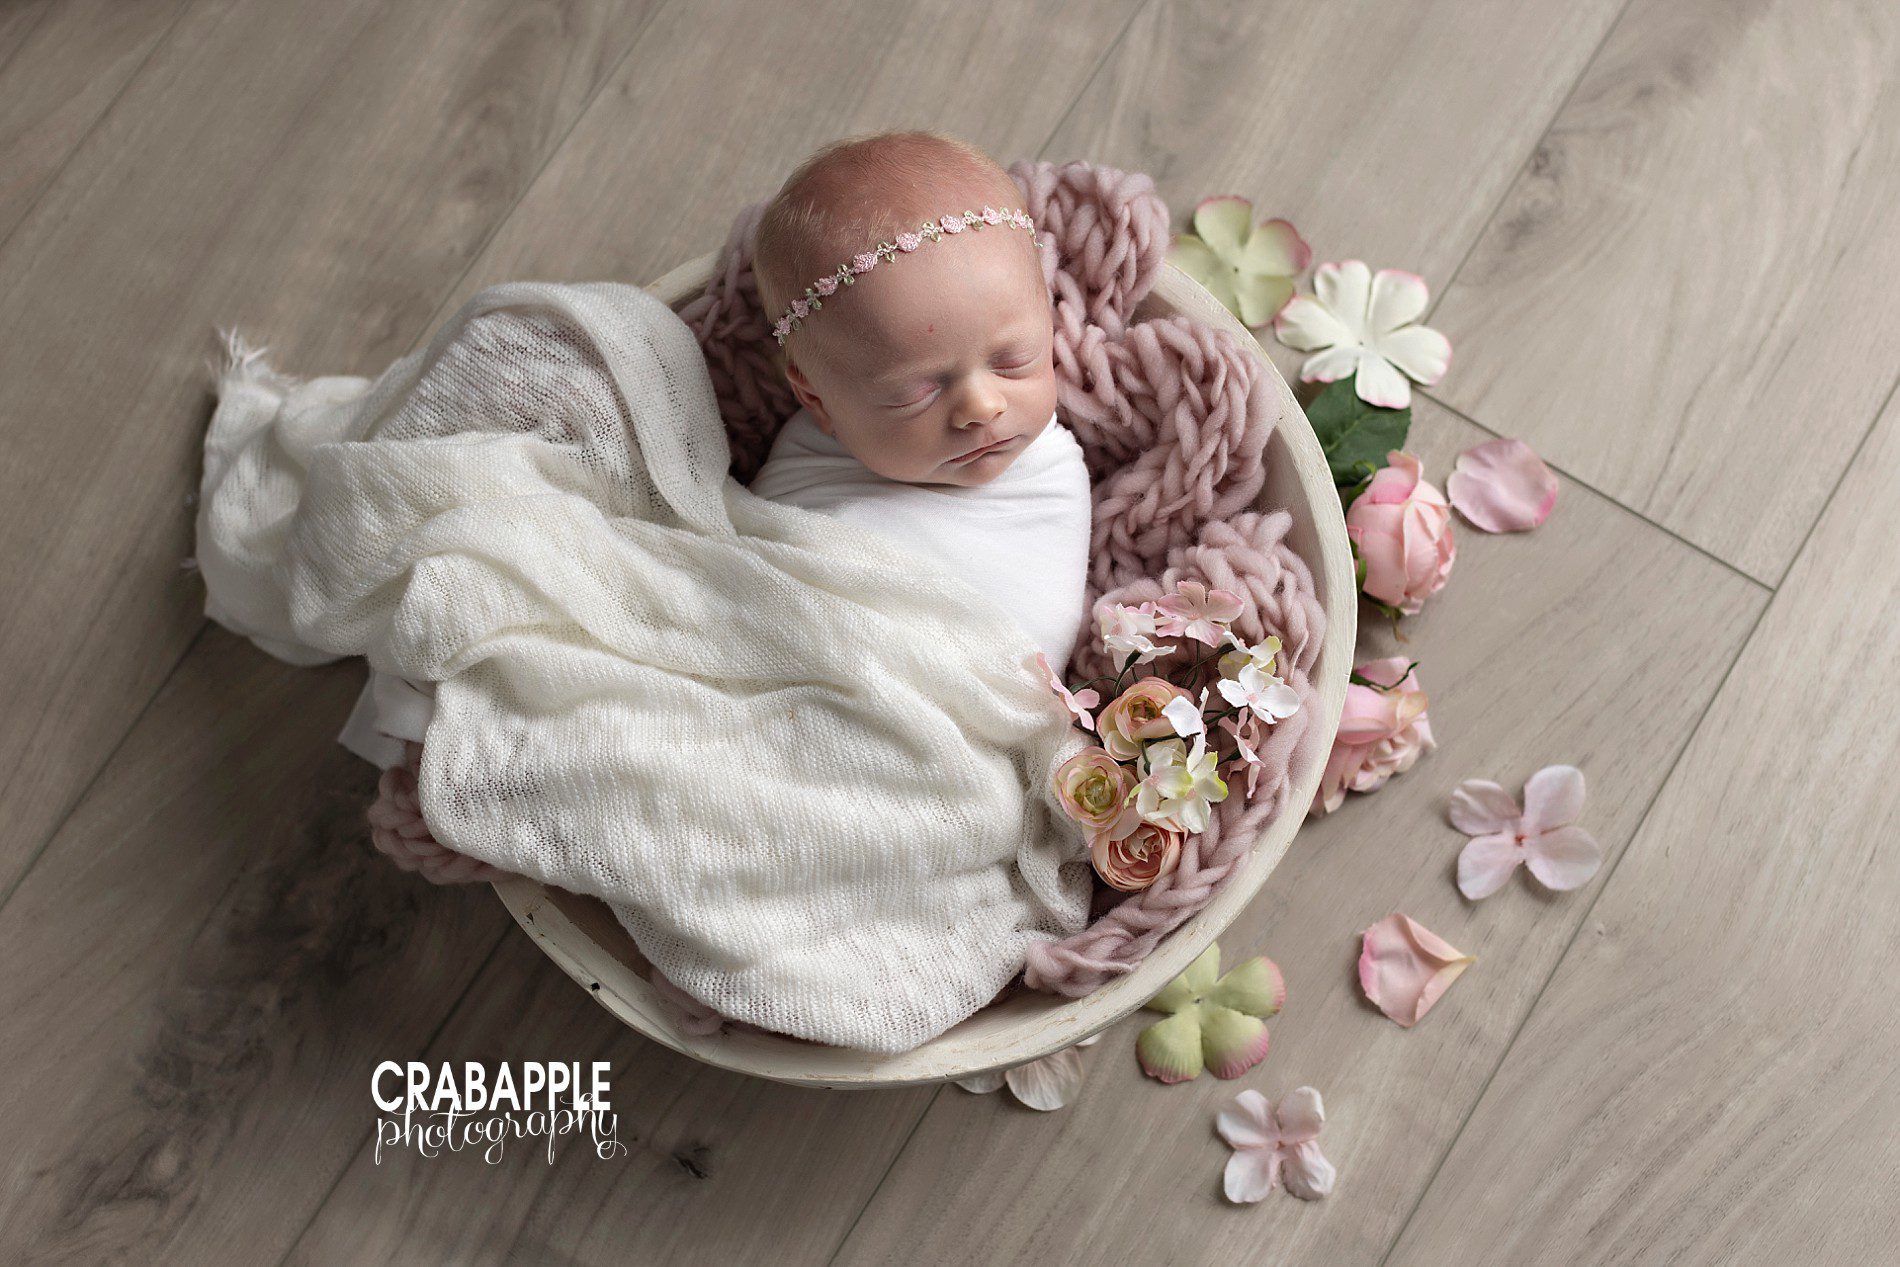 Newborn baby girl portrait of baby swaddled in white with a dusty pink knit blanket, faux flowers, and scattered faux flower petals.